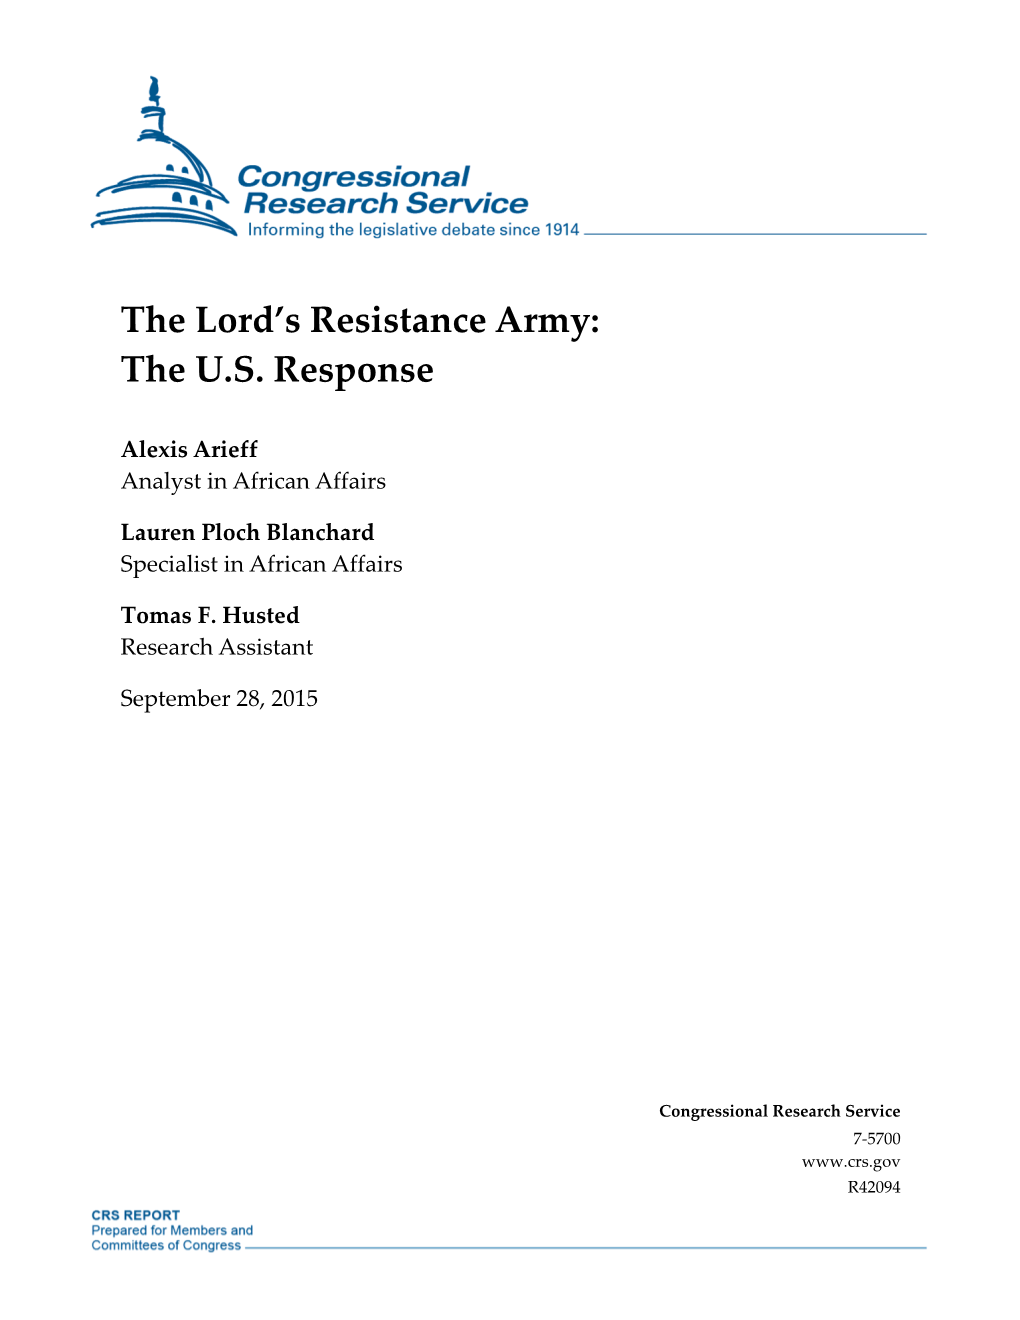 The Lord's Resistance Army: the U.S. Response